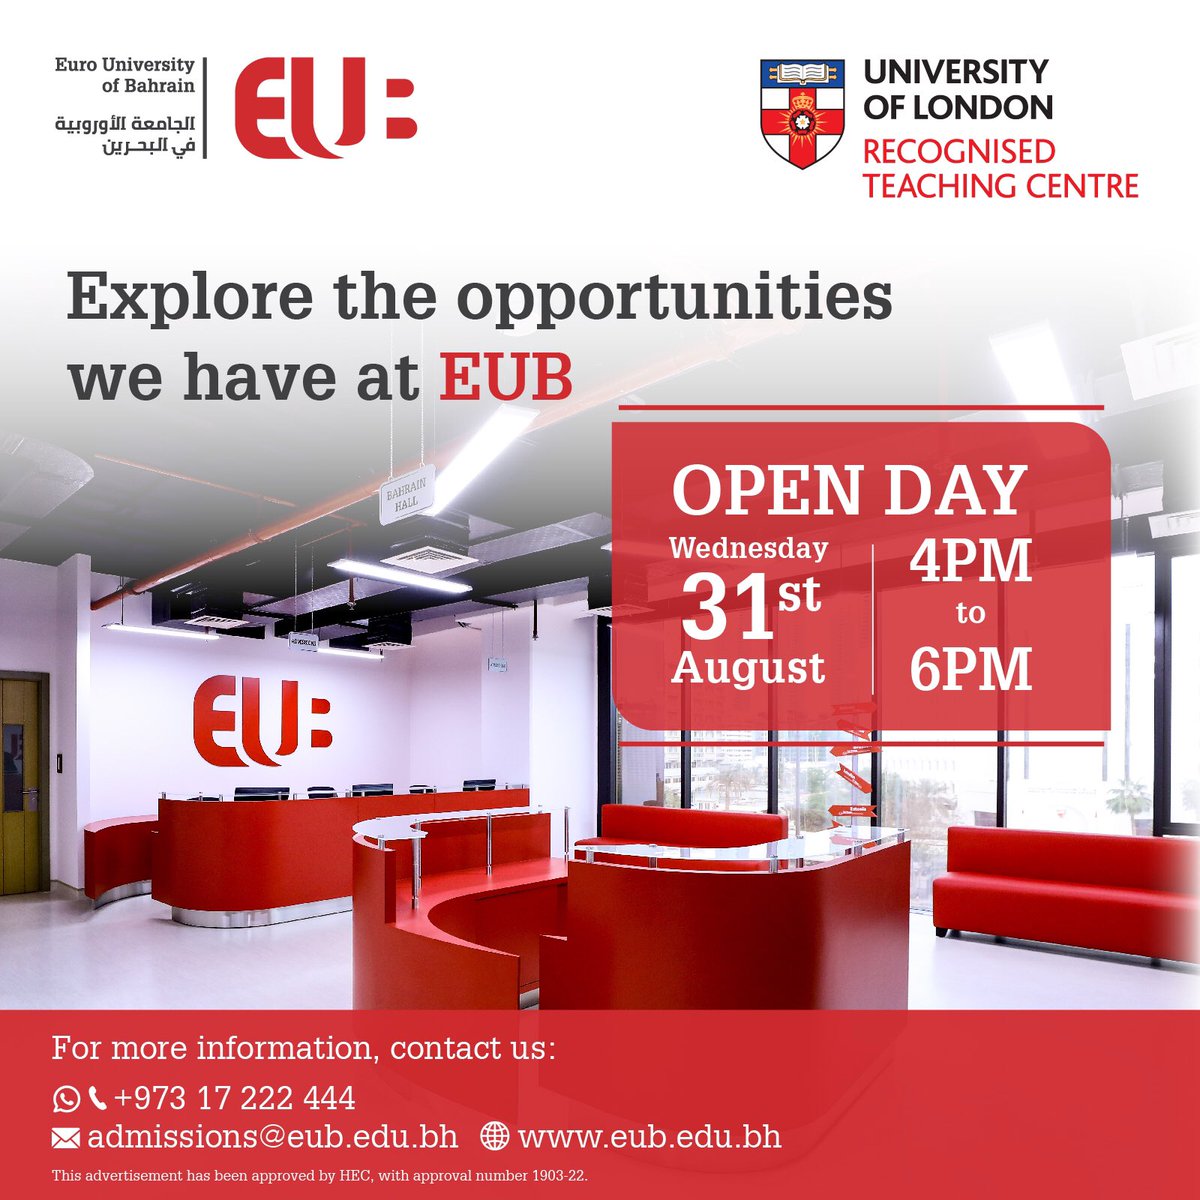 We invite you to explore the opportunities we offer at Euro University of Bahrain.

Our open day will be held tomorrow, August 31st from 4PM until 6PM.

#HigherEducation #Bahrain #EUB #JoinTheWorldClass #openday #university #universityopenday